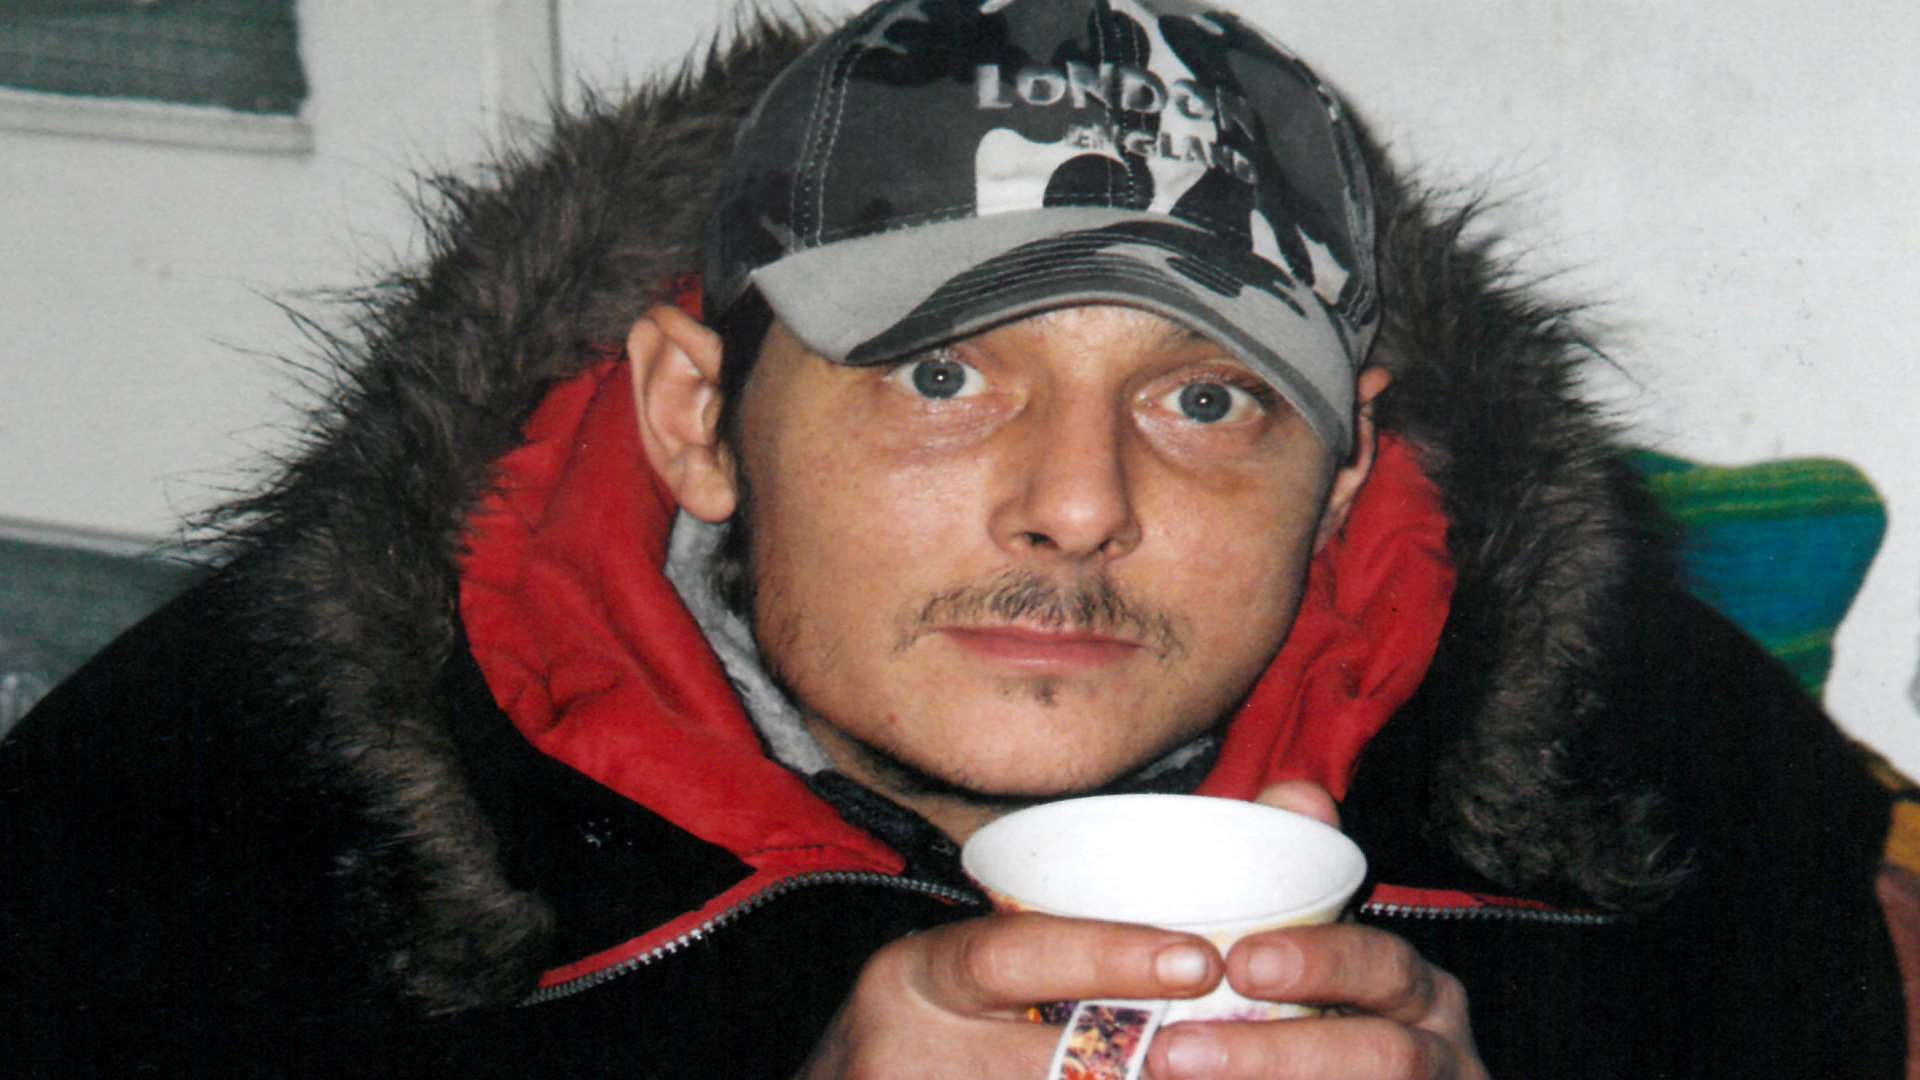 Homeless David Wilkes died in hospital days after being attacked in a Canterbury park